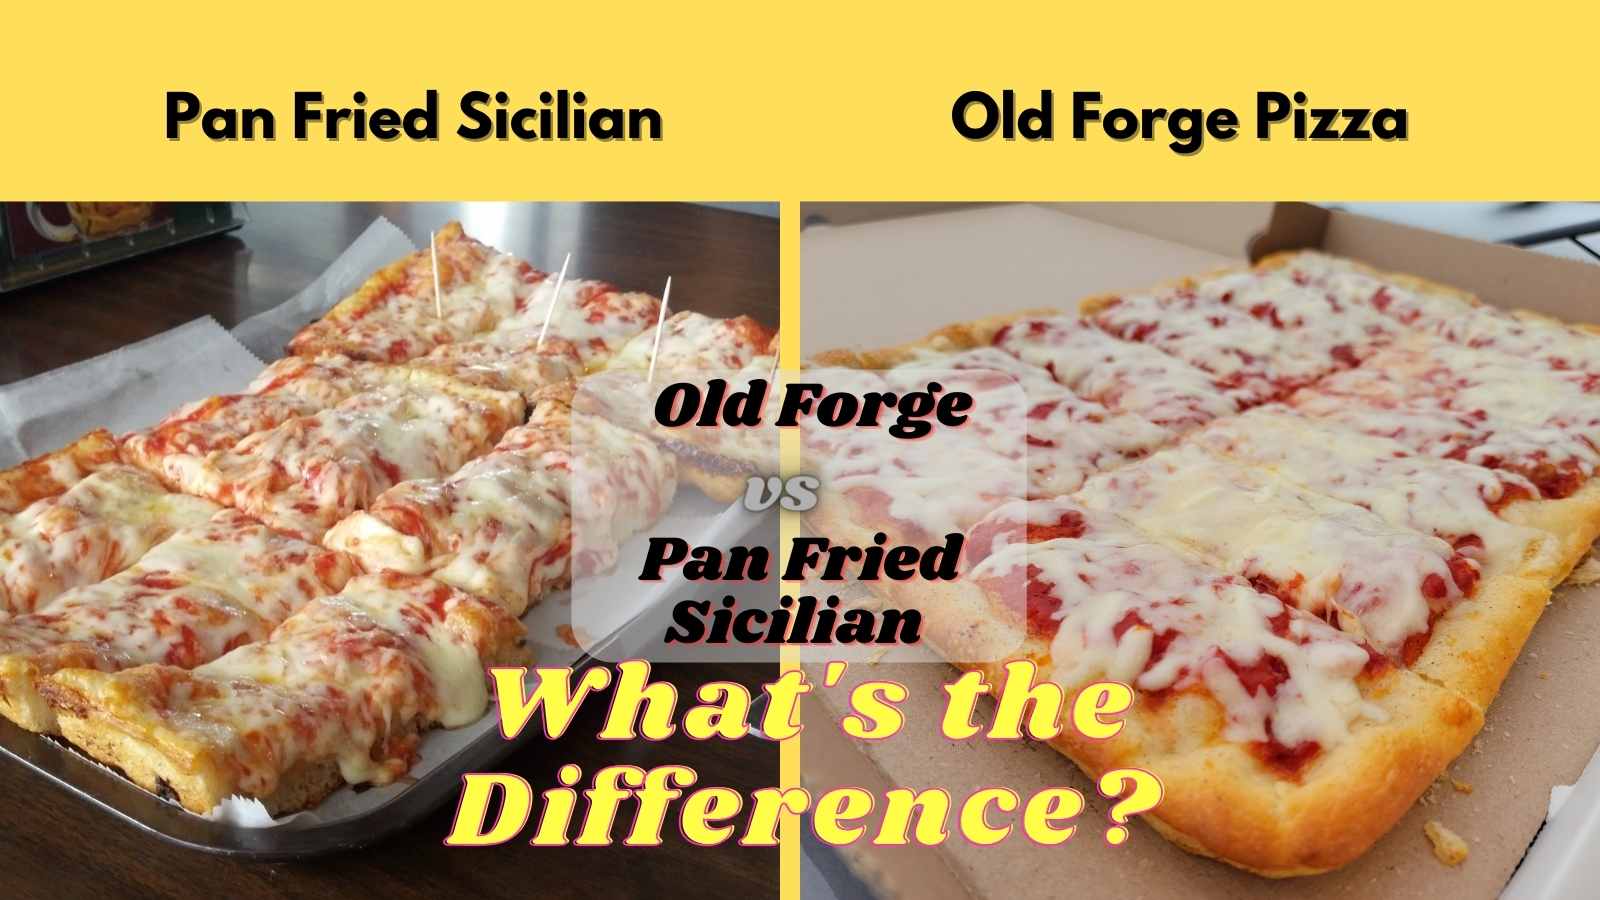 https://nepapizzareview.com/wp-content/uploads/2023/03/Old-Forge-Pizza-vs-Pan-Fried-Sicilian-Pizza-What-is-the-Difference.jpg